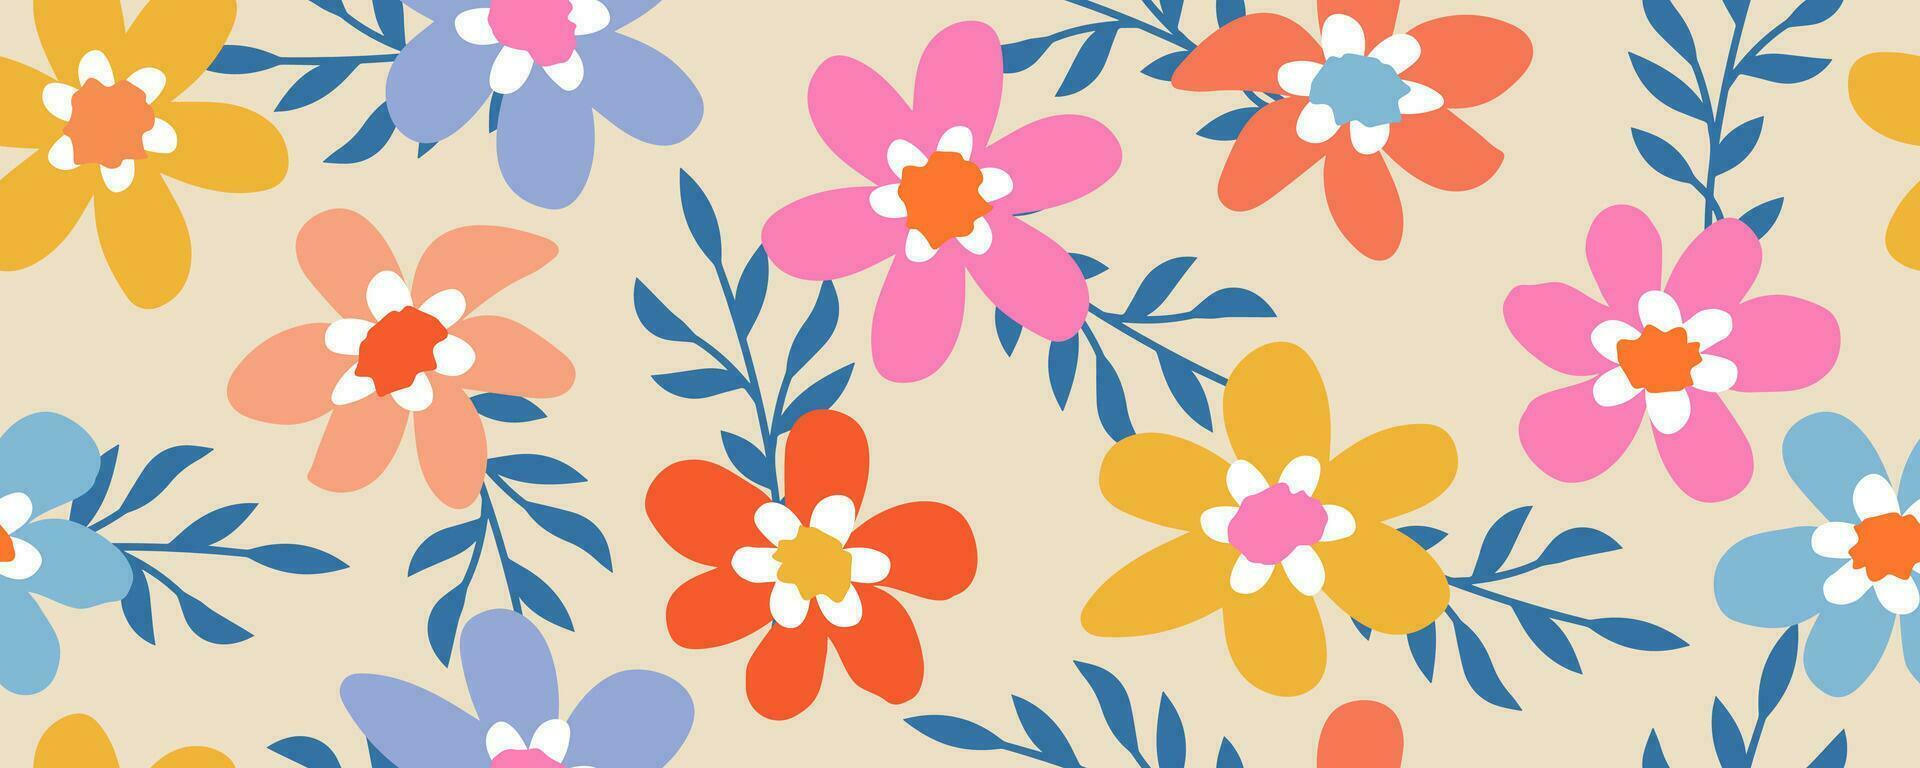 Hand drawn flowers, seamless patterns with floral for fabric, textiles, clothing, wrapping paper, cover, banner, interior decor, abstract backgrounds. vector